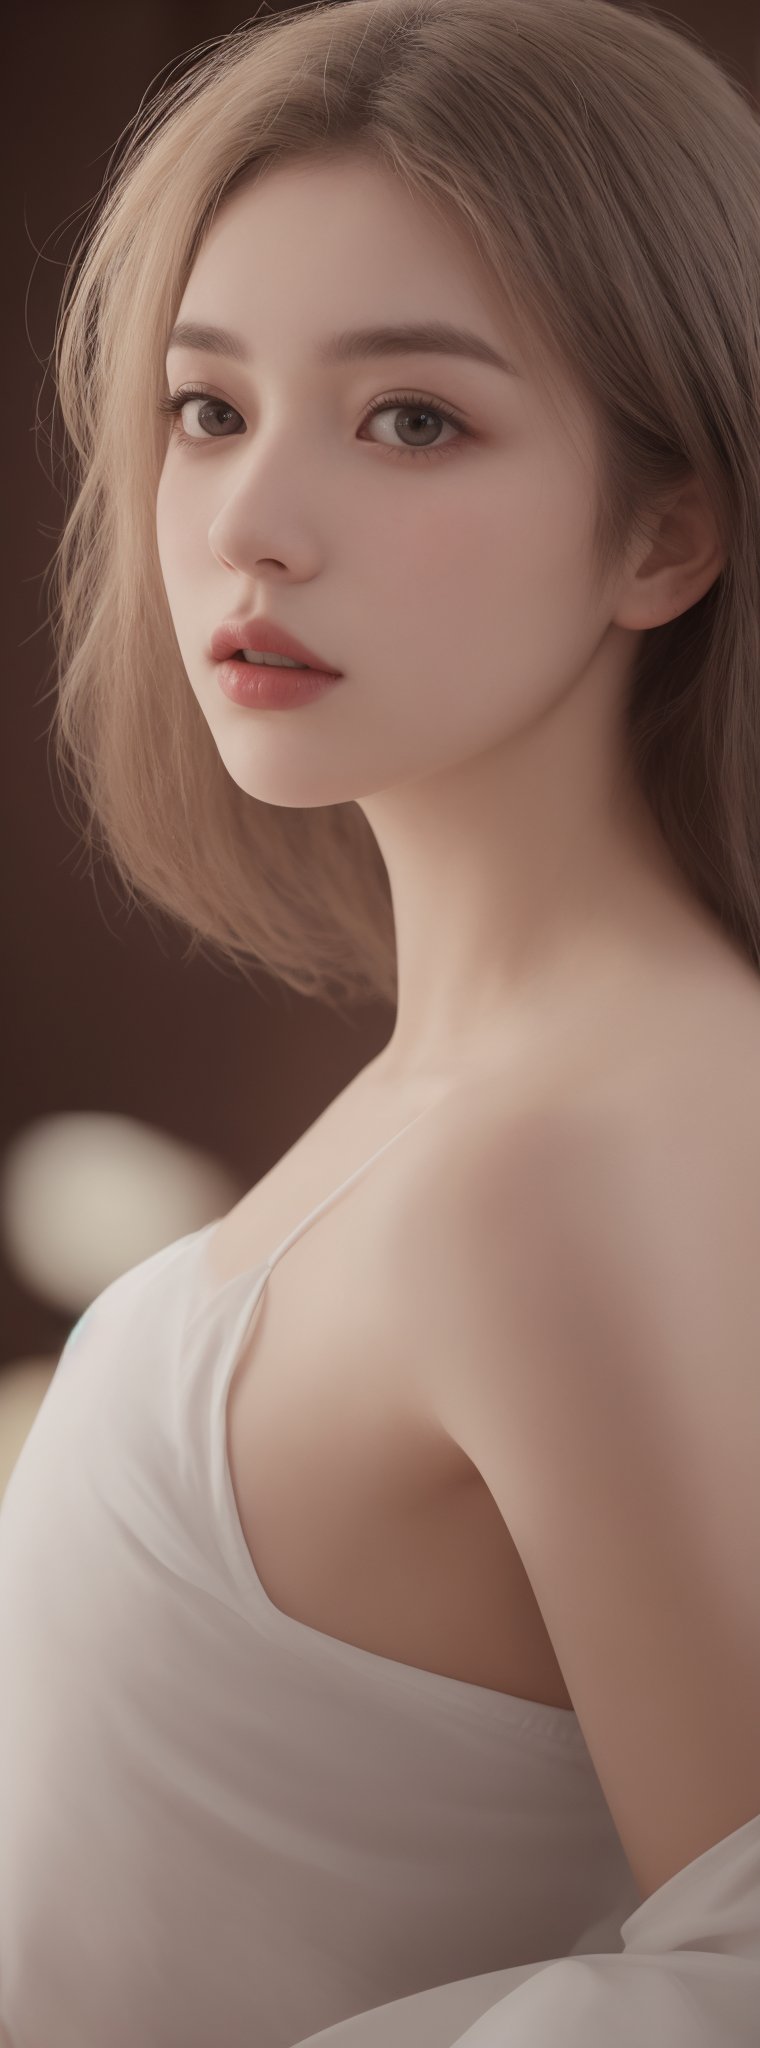 a beautiful girl 18 years, with silver short hair, messy hair, red lipstic, full lips, alluring, portrait by Charles Miano, , soft lighting, detailed, more Flowing rhythm, elegant, low contrast,Korean,Japanese,perfect light